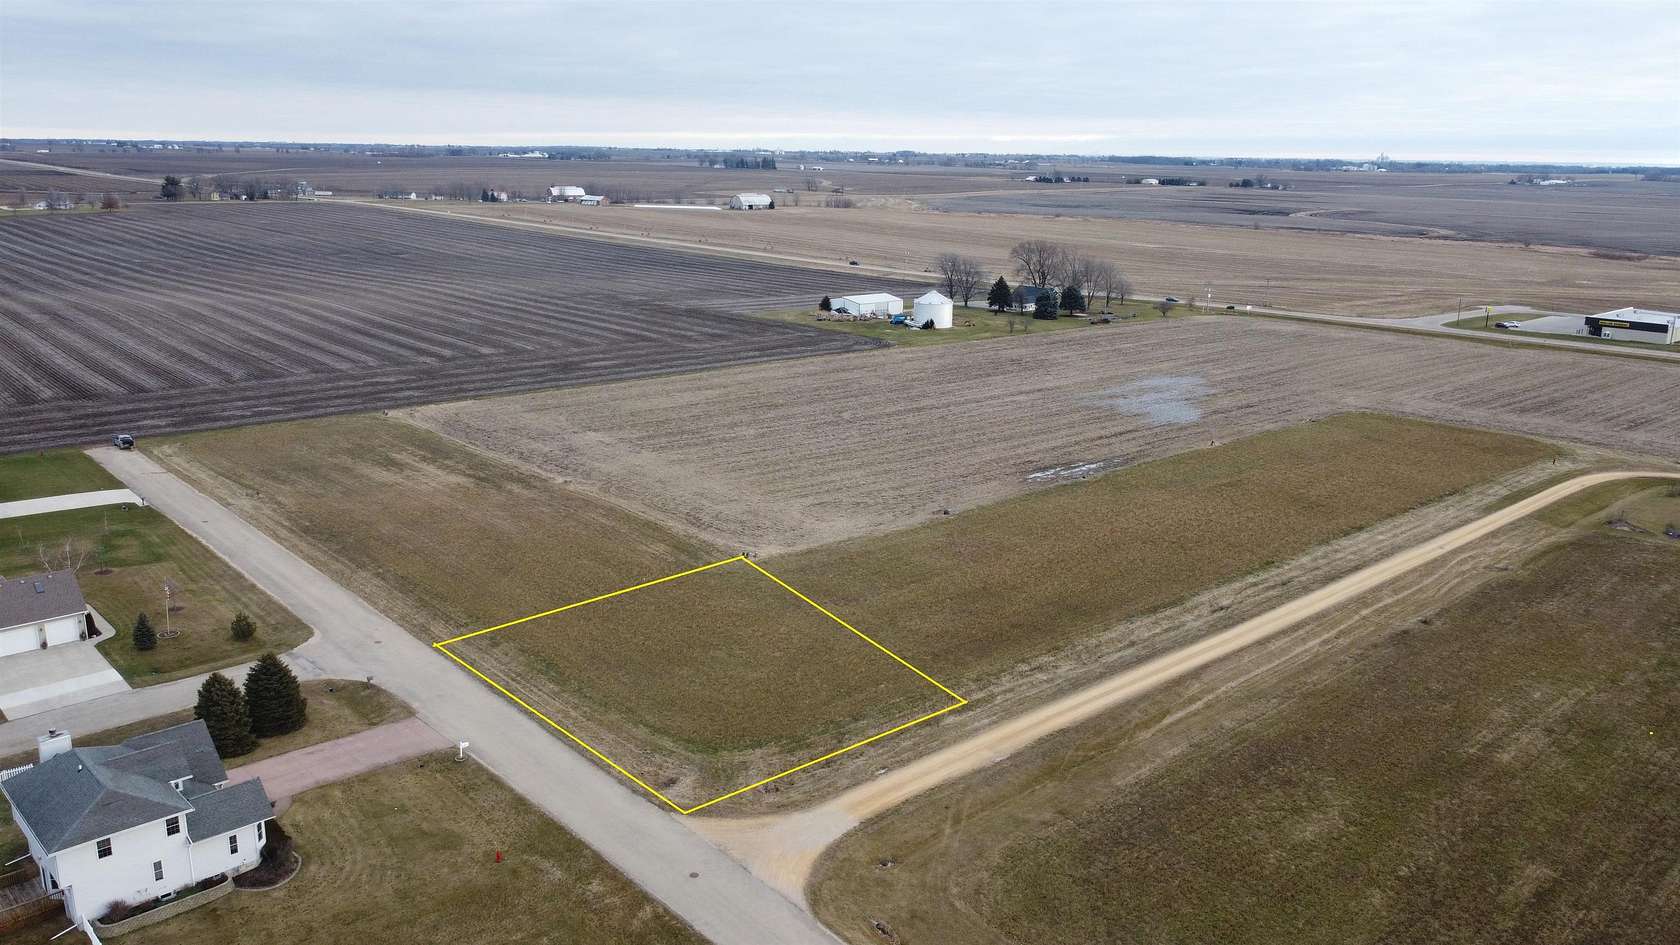 0.41 Acres of Land for Sale in Amboy, Illinois